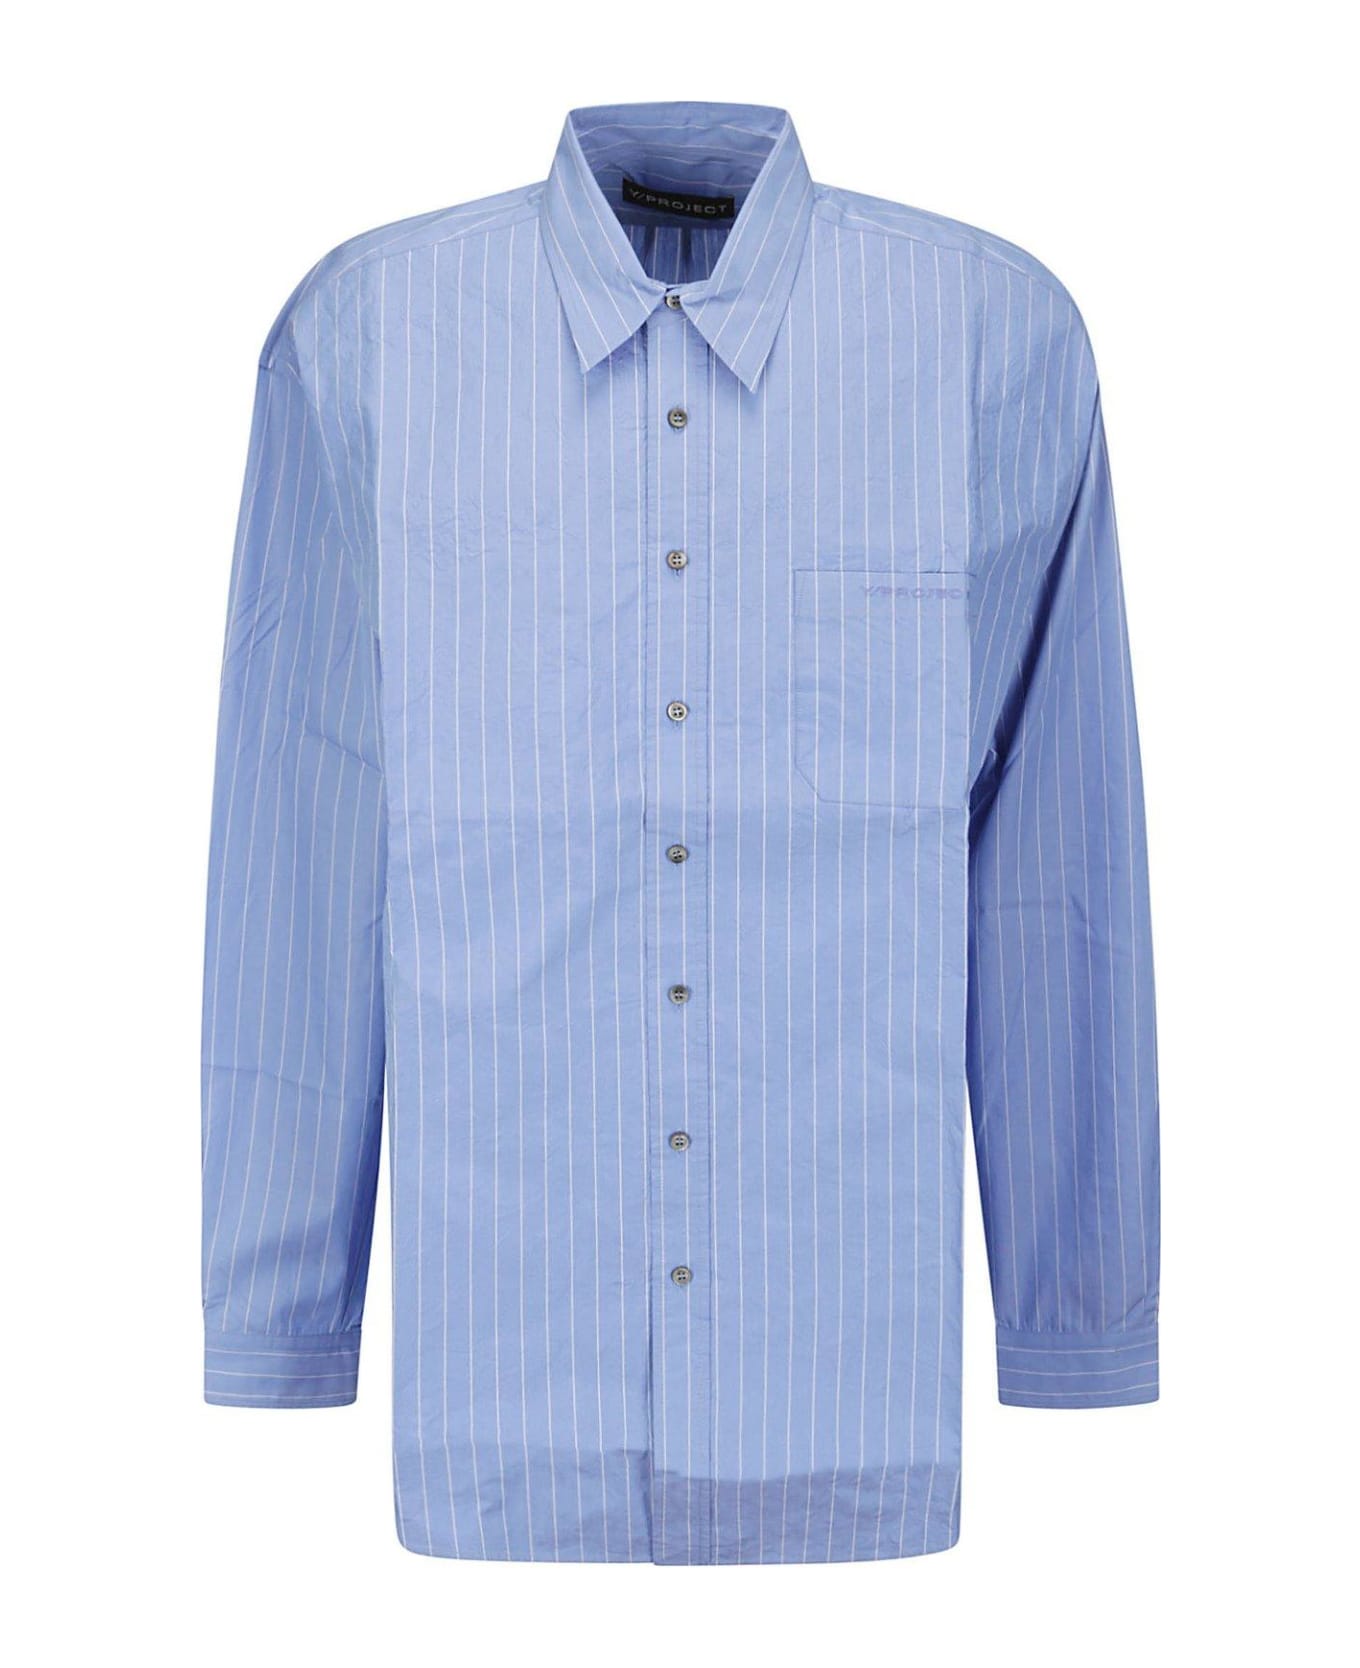 Y/Project Striped Buttoned Shirt - BLUE